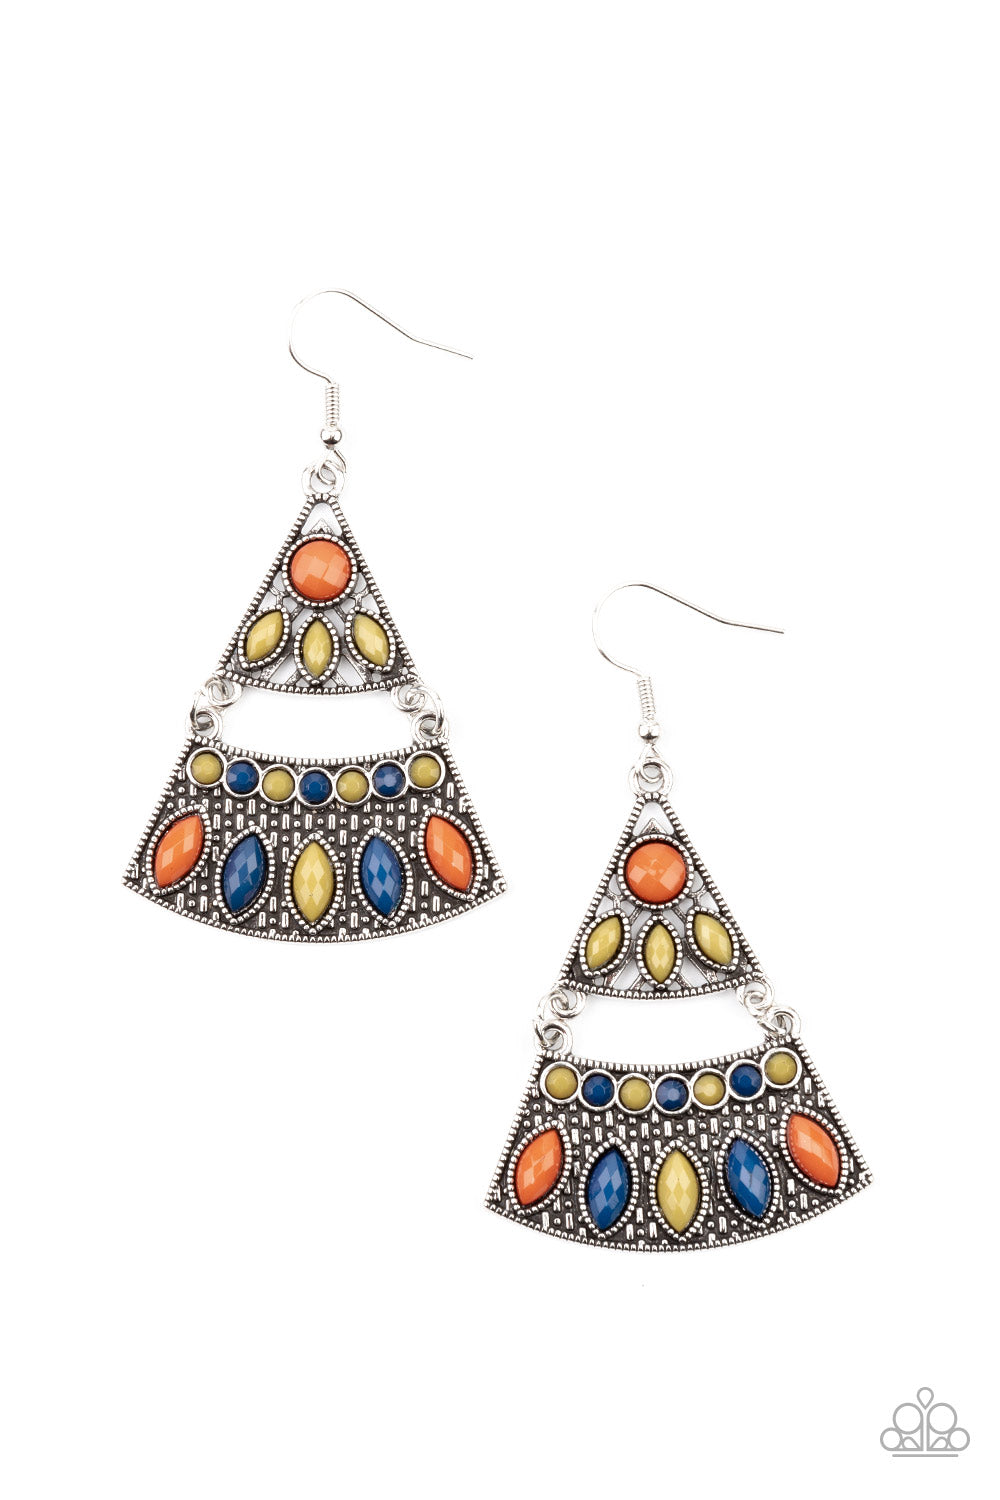 Desert Fiesta - Multi Studded Earrings Mismatched blue, green, and Rust colored beads adorn the fronts of studded triangular and rectangular silver frames that link into a tribal inspired lure. Earring attaches to a standard fishhook fitting.  Sold as one pair of earrings.